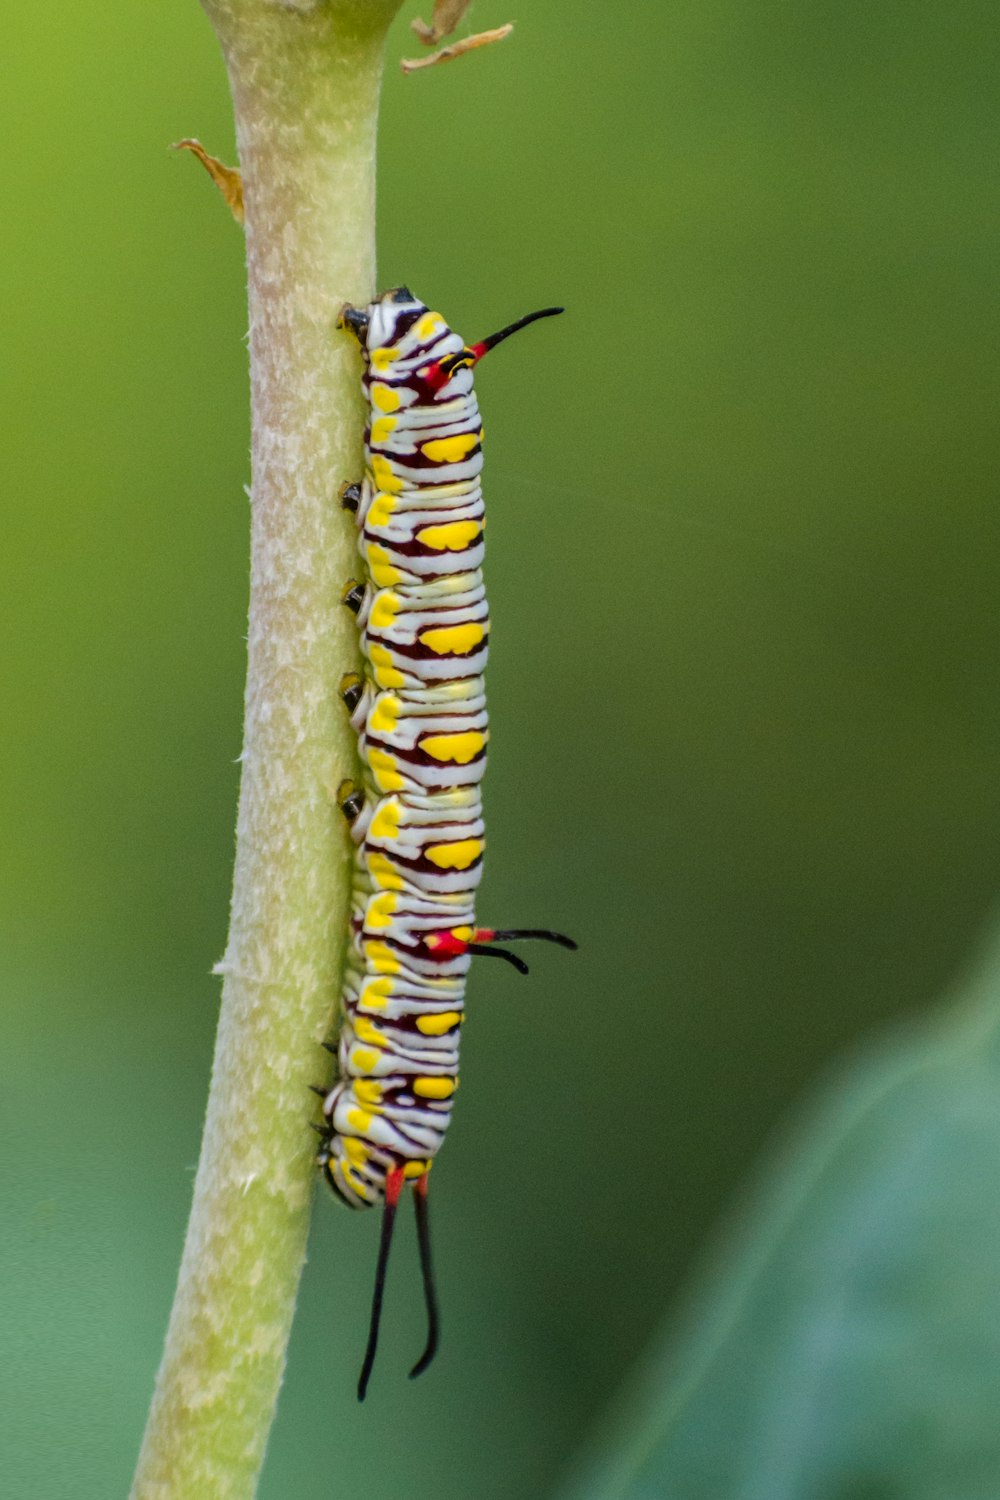 550+ Caterpillar Pictures | Download Free Images on Unsplash